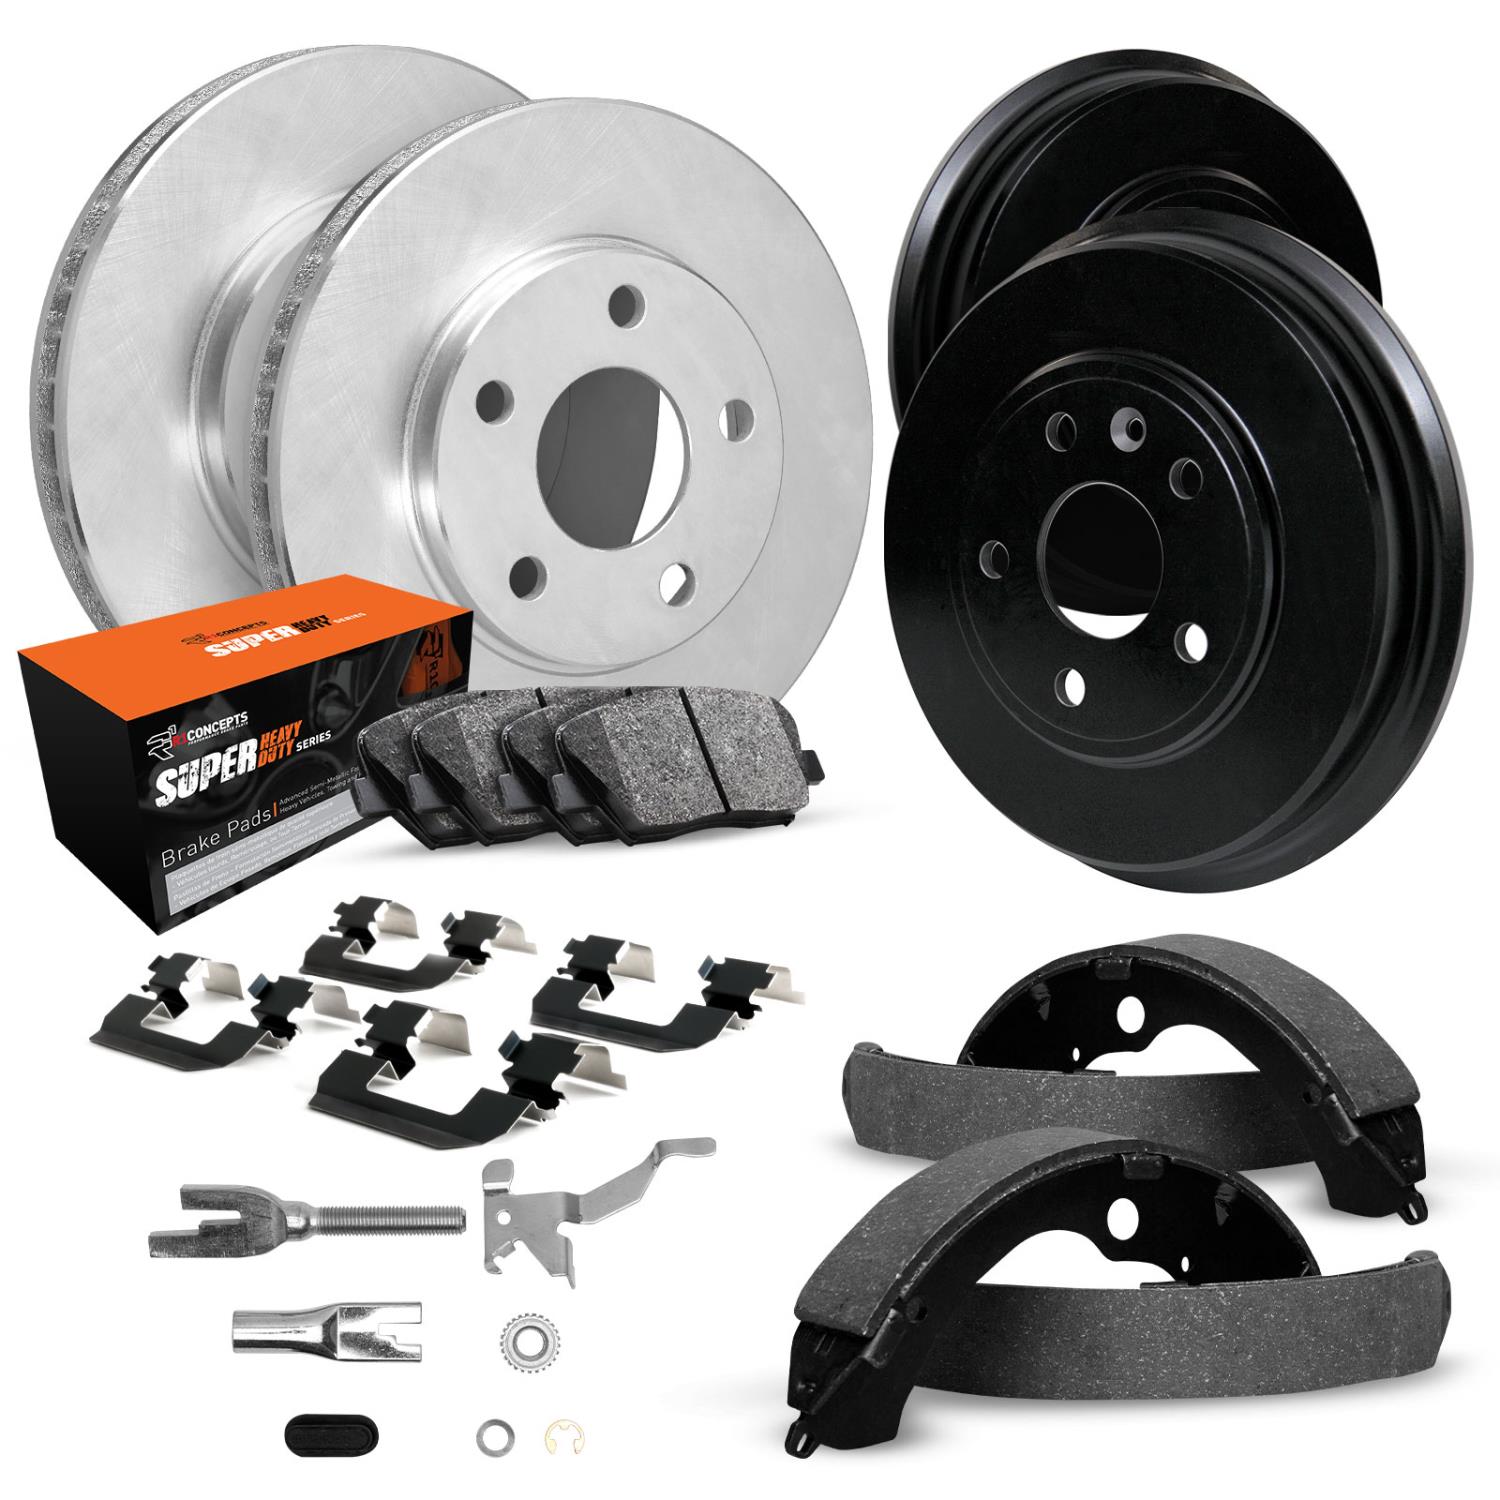 E-Line Blank Brake Rotor & Drum Set w/Super-Duty Pads, Shoes, Hardware, & Adjusters, 1988-1991 GM, Position: Front & Rear